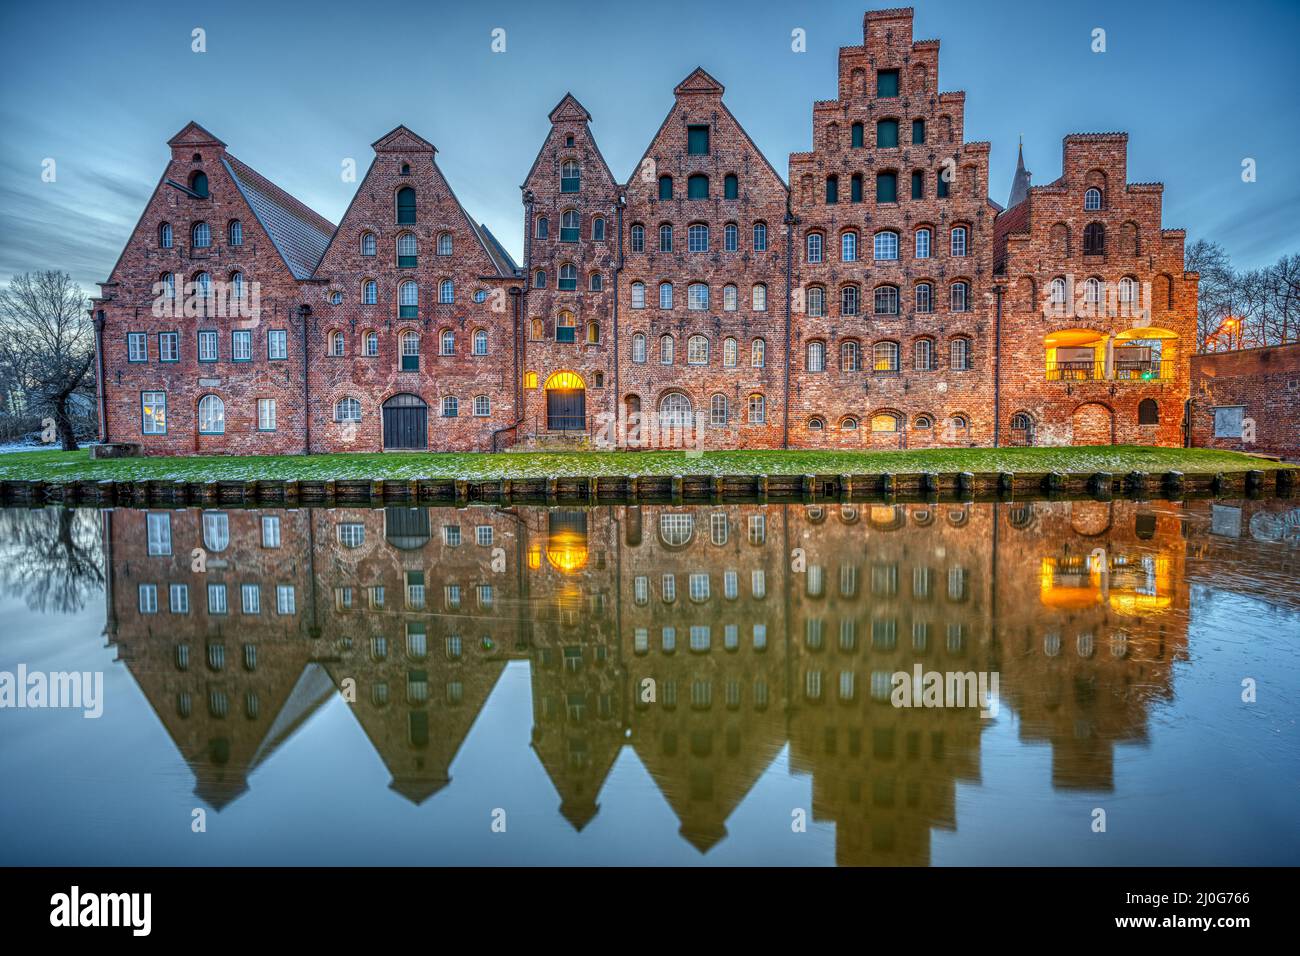 The historic Salzspeicher reflecting in the Trave river at dawn, seen in Luebeck, Germany Stock Photo